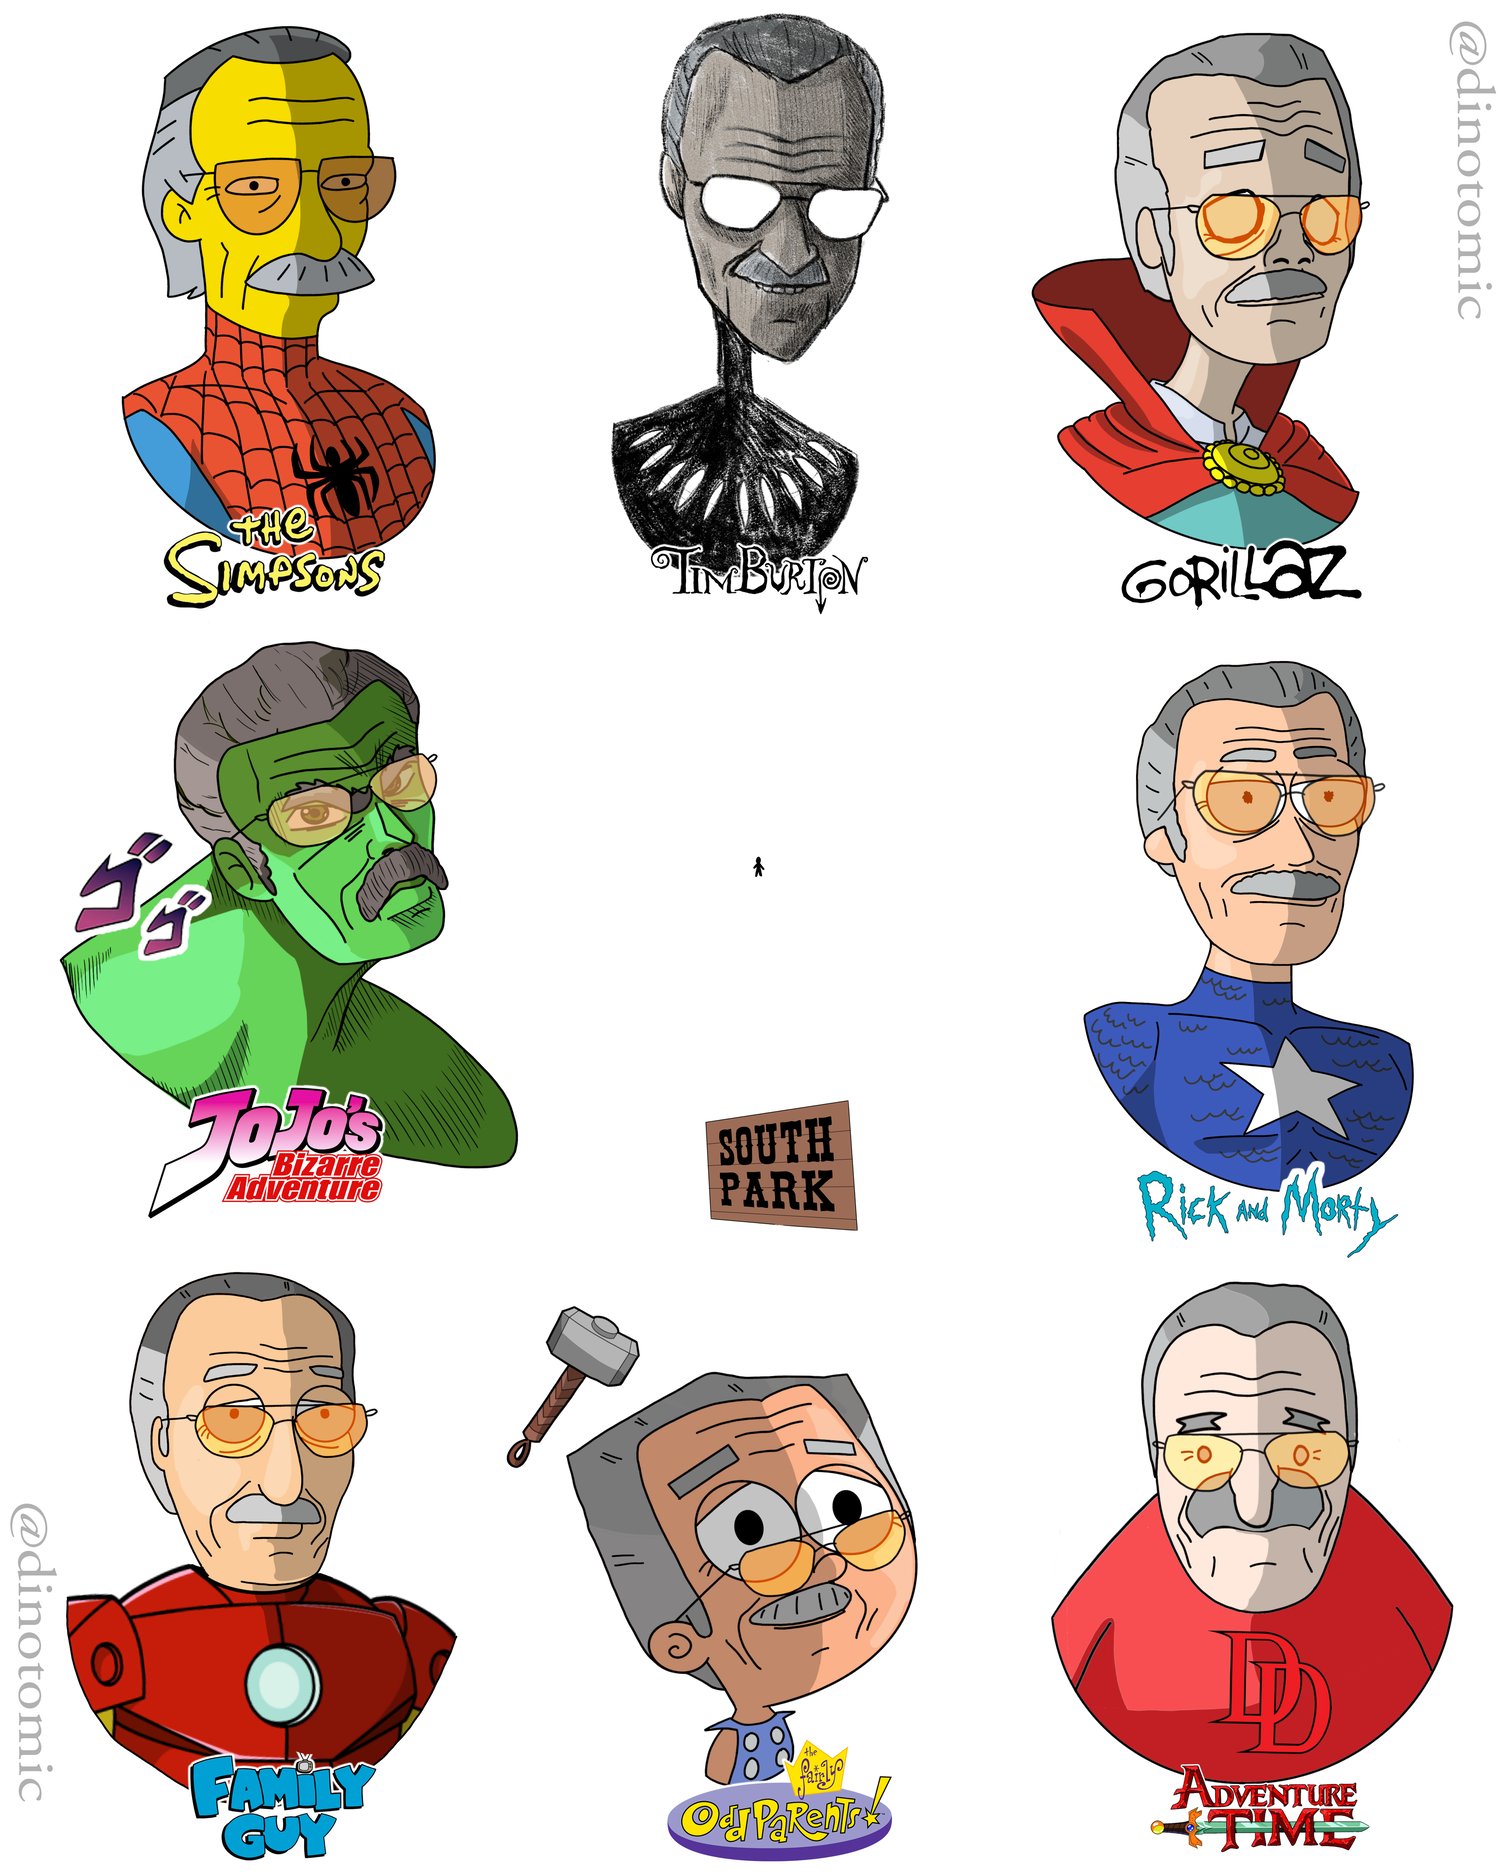 Image of #188 Stan Lee drawn in different styles